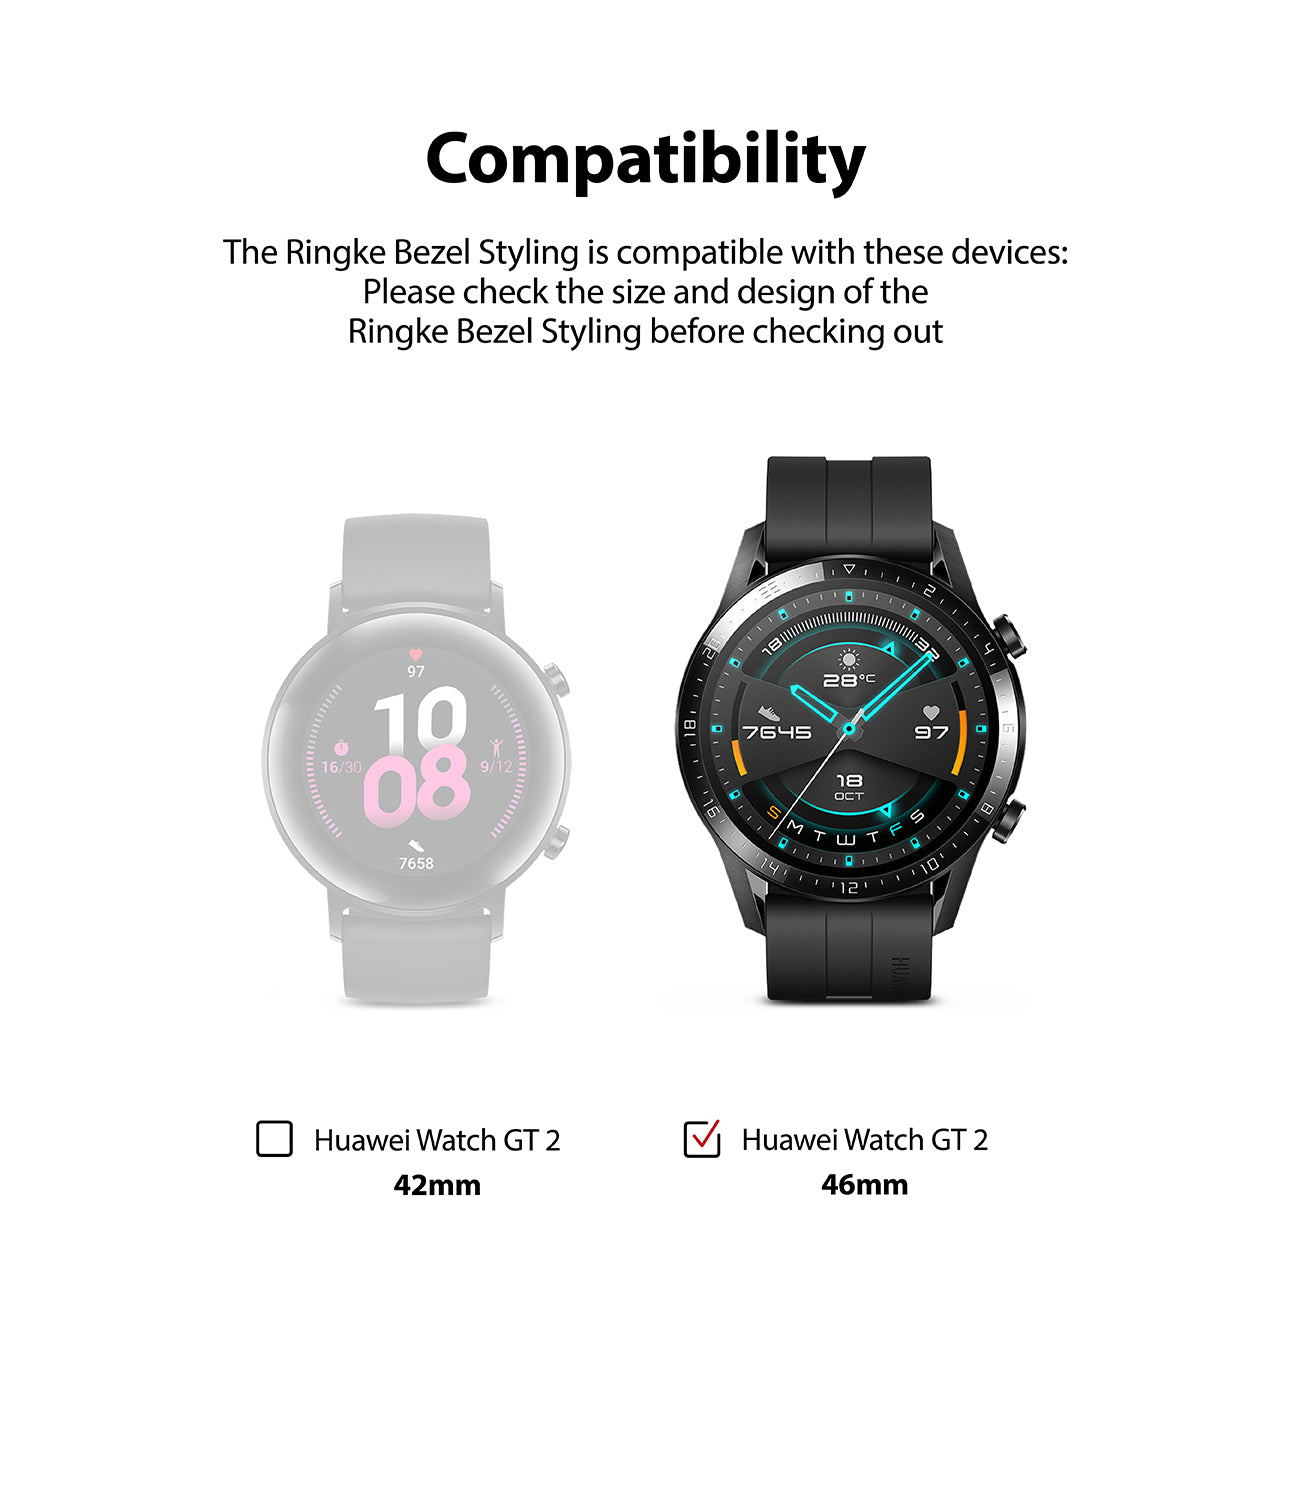 only compatible with huawei watch gt 2